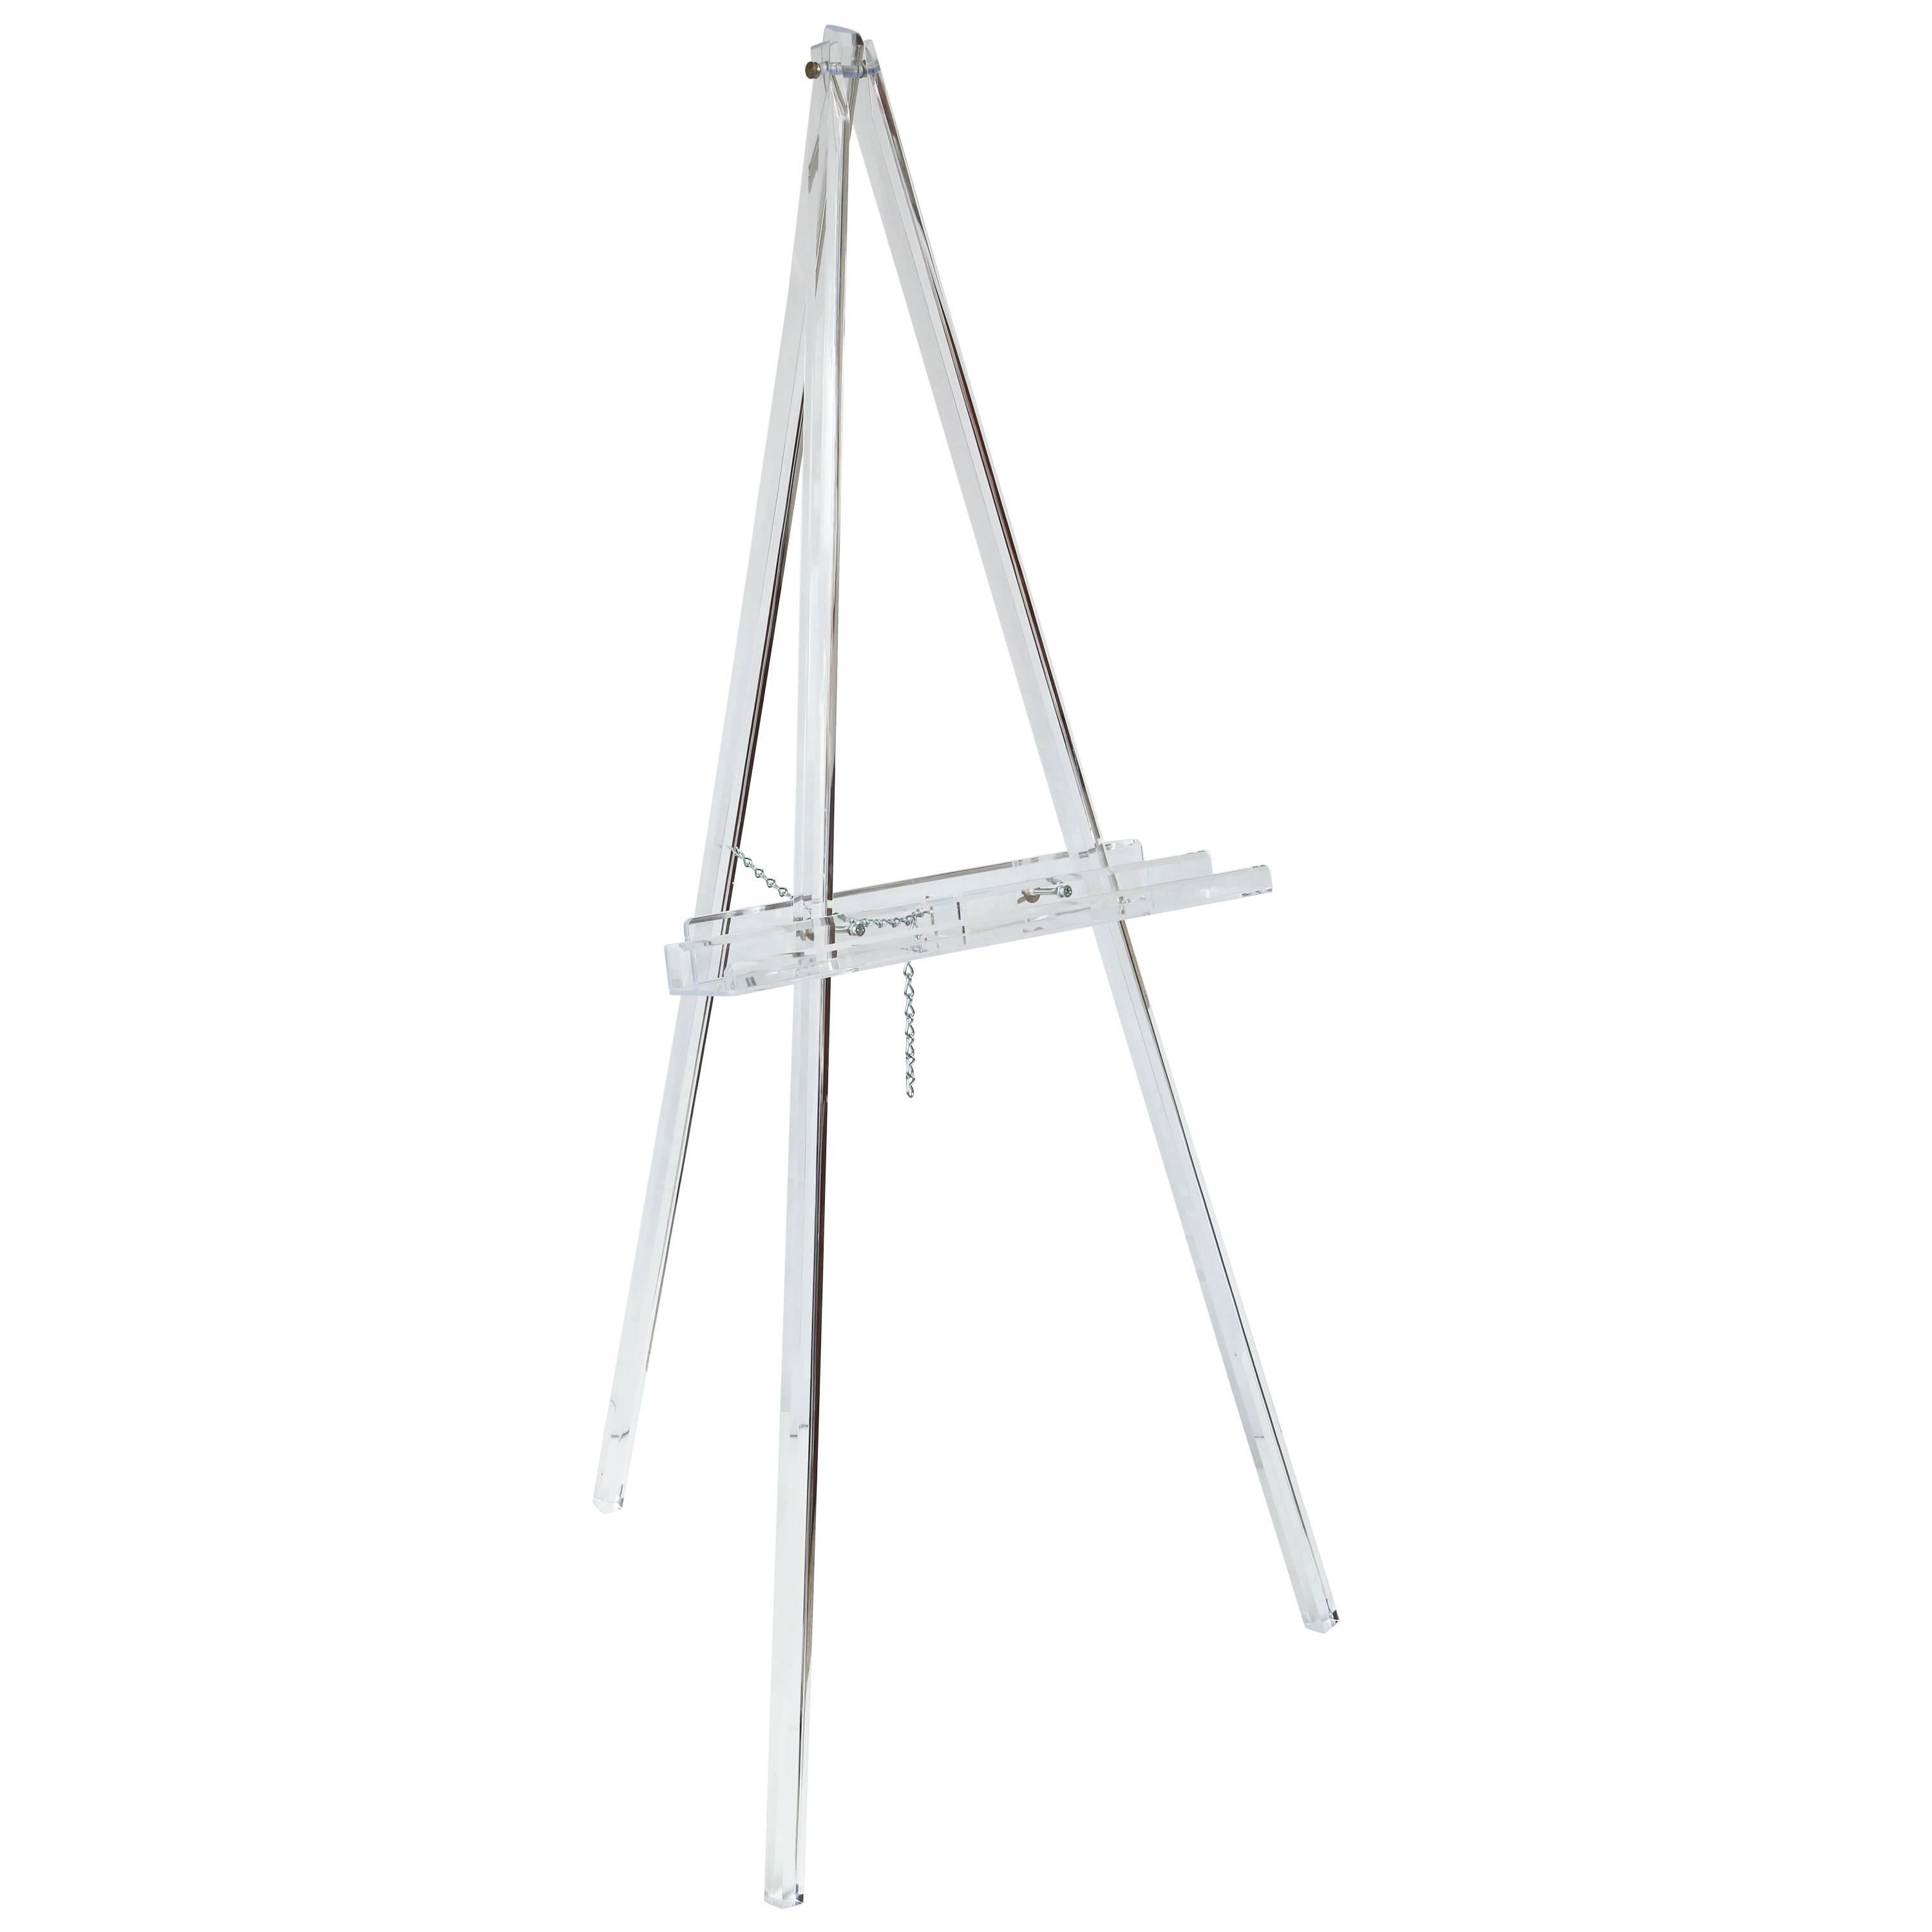 Bespoke Lucite Easel by Alexander Millen with Adjustable Leg and Frame-Lip